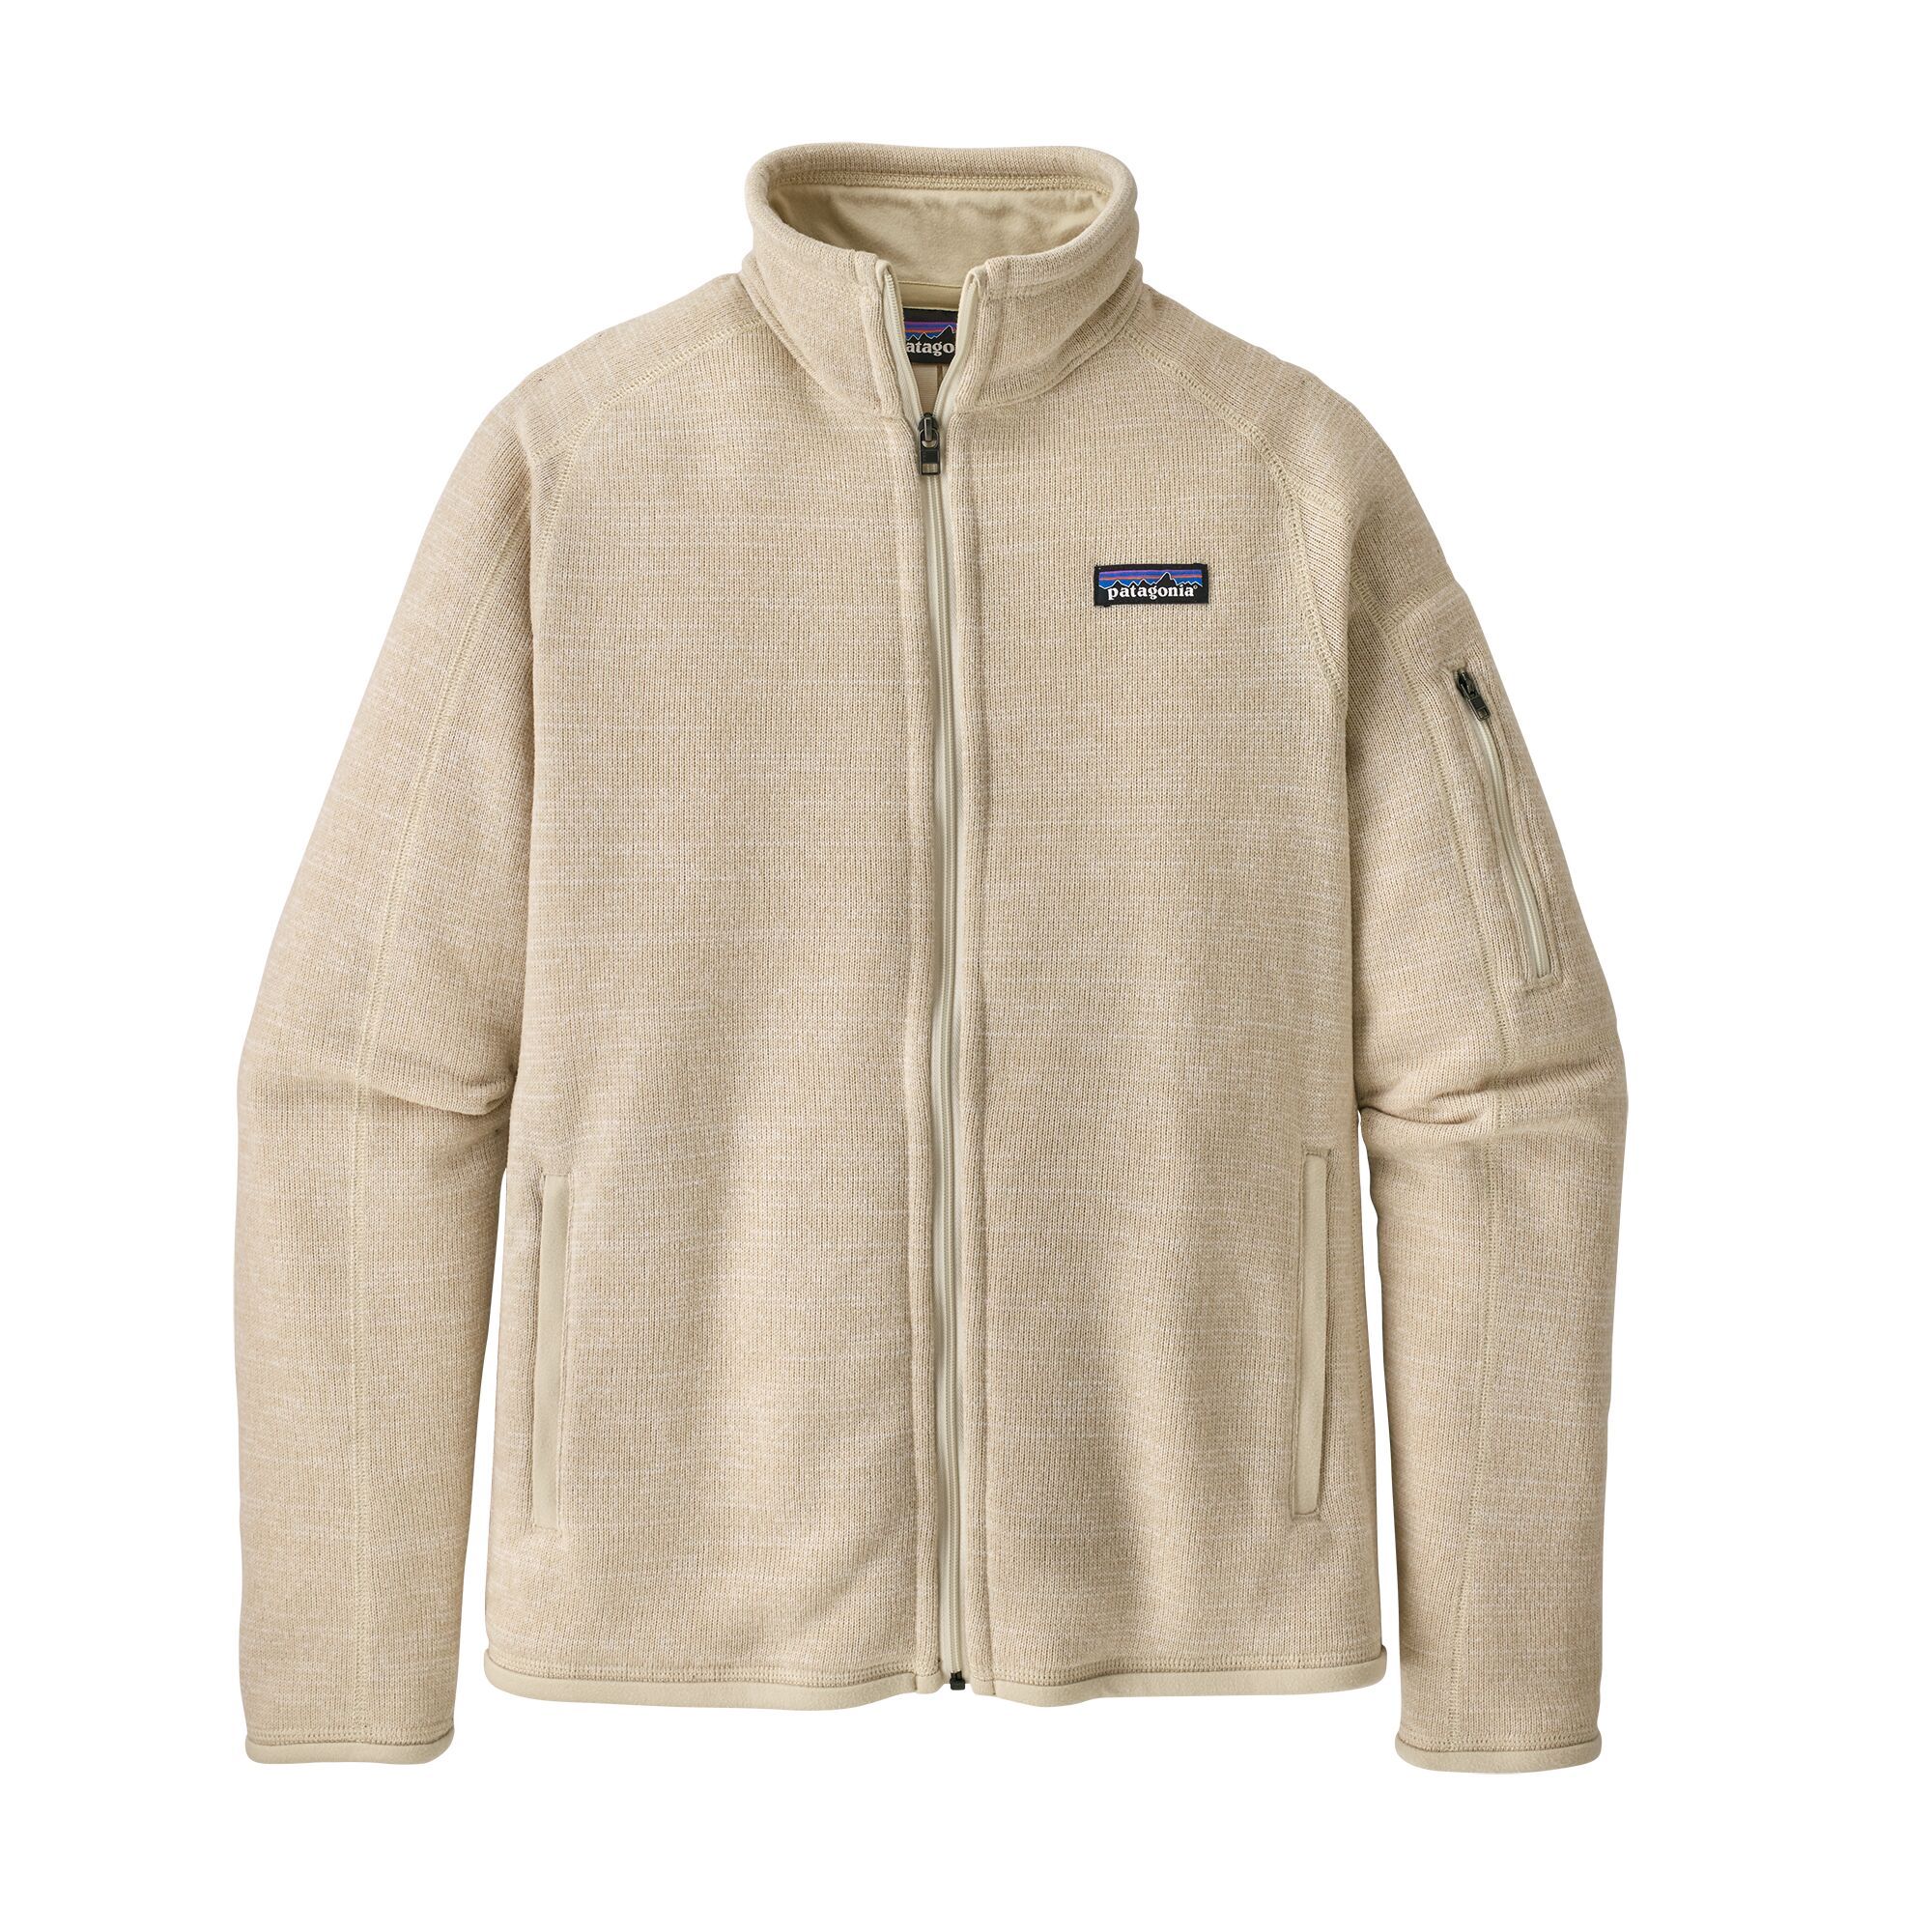 https://apexoutfitter.com/cdn/shop/products/patagonia-better-sweater-jacket-womens-jackets-fleece-patagonia-oyster-white-xs-161418_2000x.jpg?v=1586367668